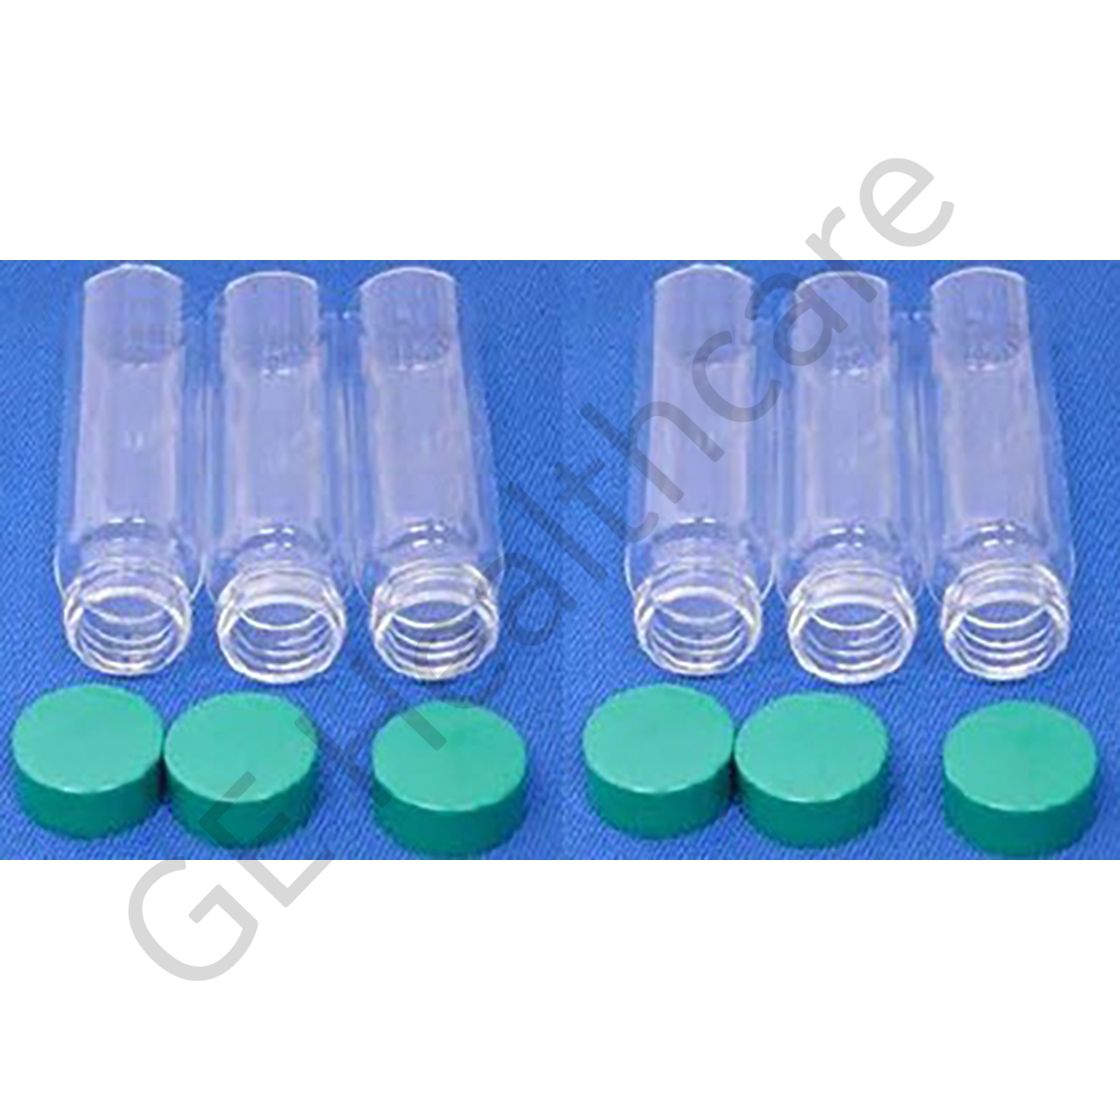 PF2SPP- FASTlab 2 Spare part 18O water recovery vial